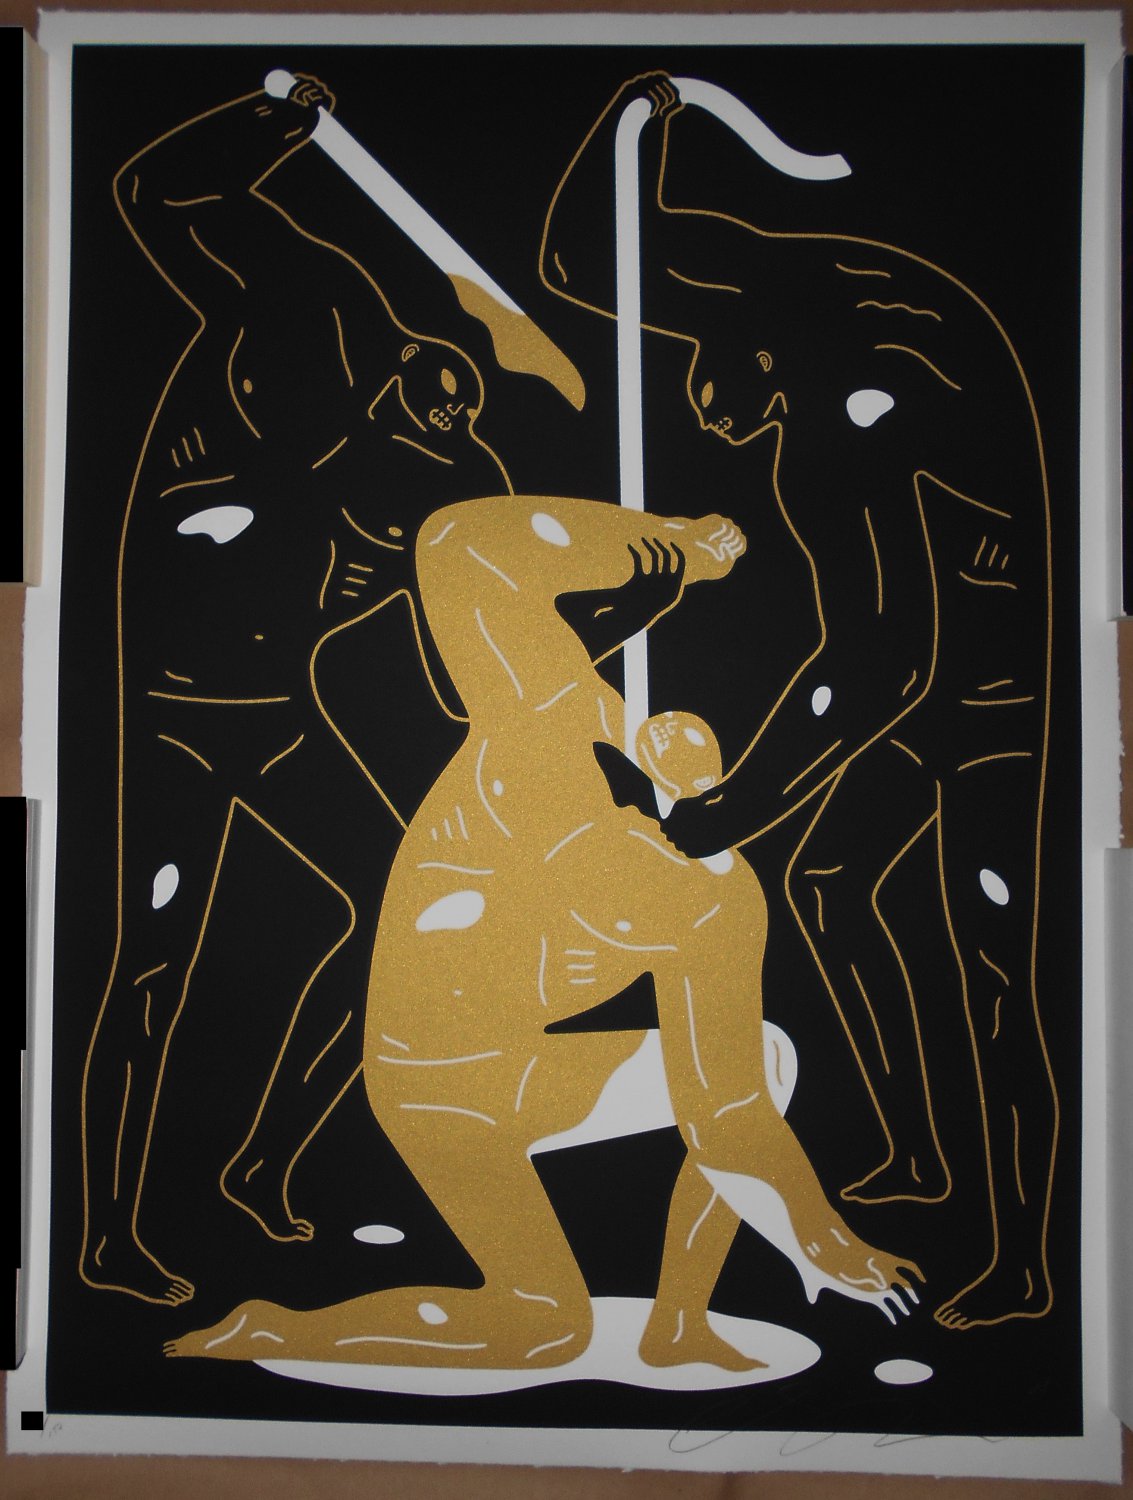 Cleon Peterson Vengeance To Take Screen Print Art Poster Signed Numbered /150